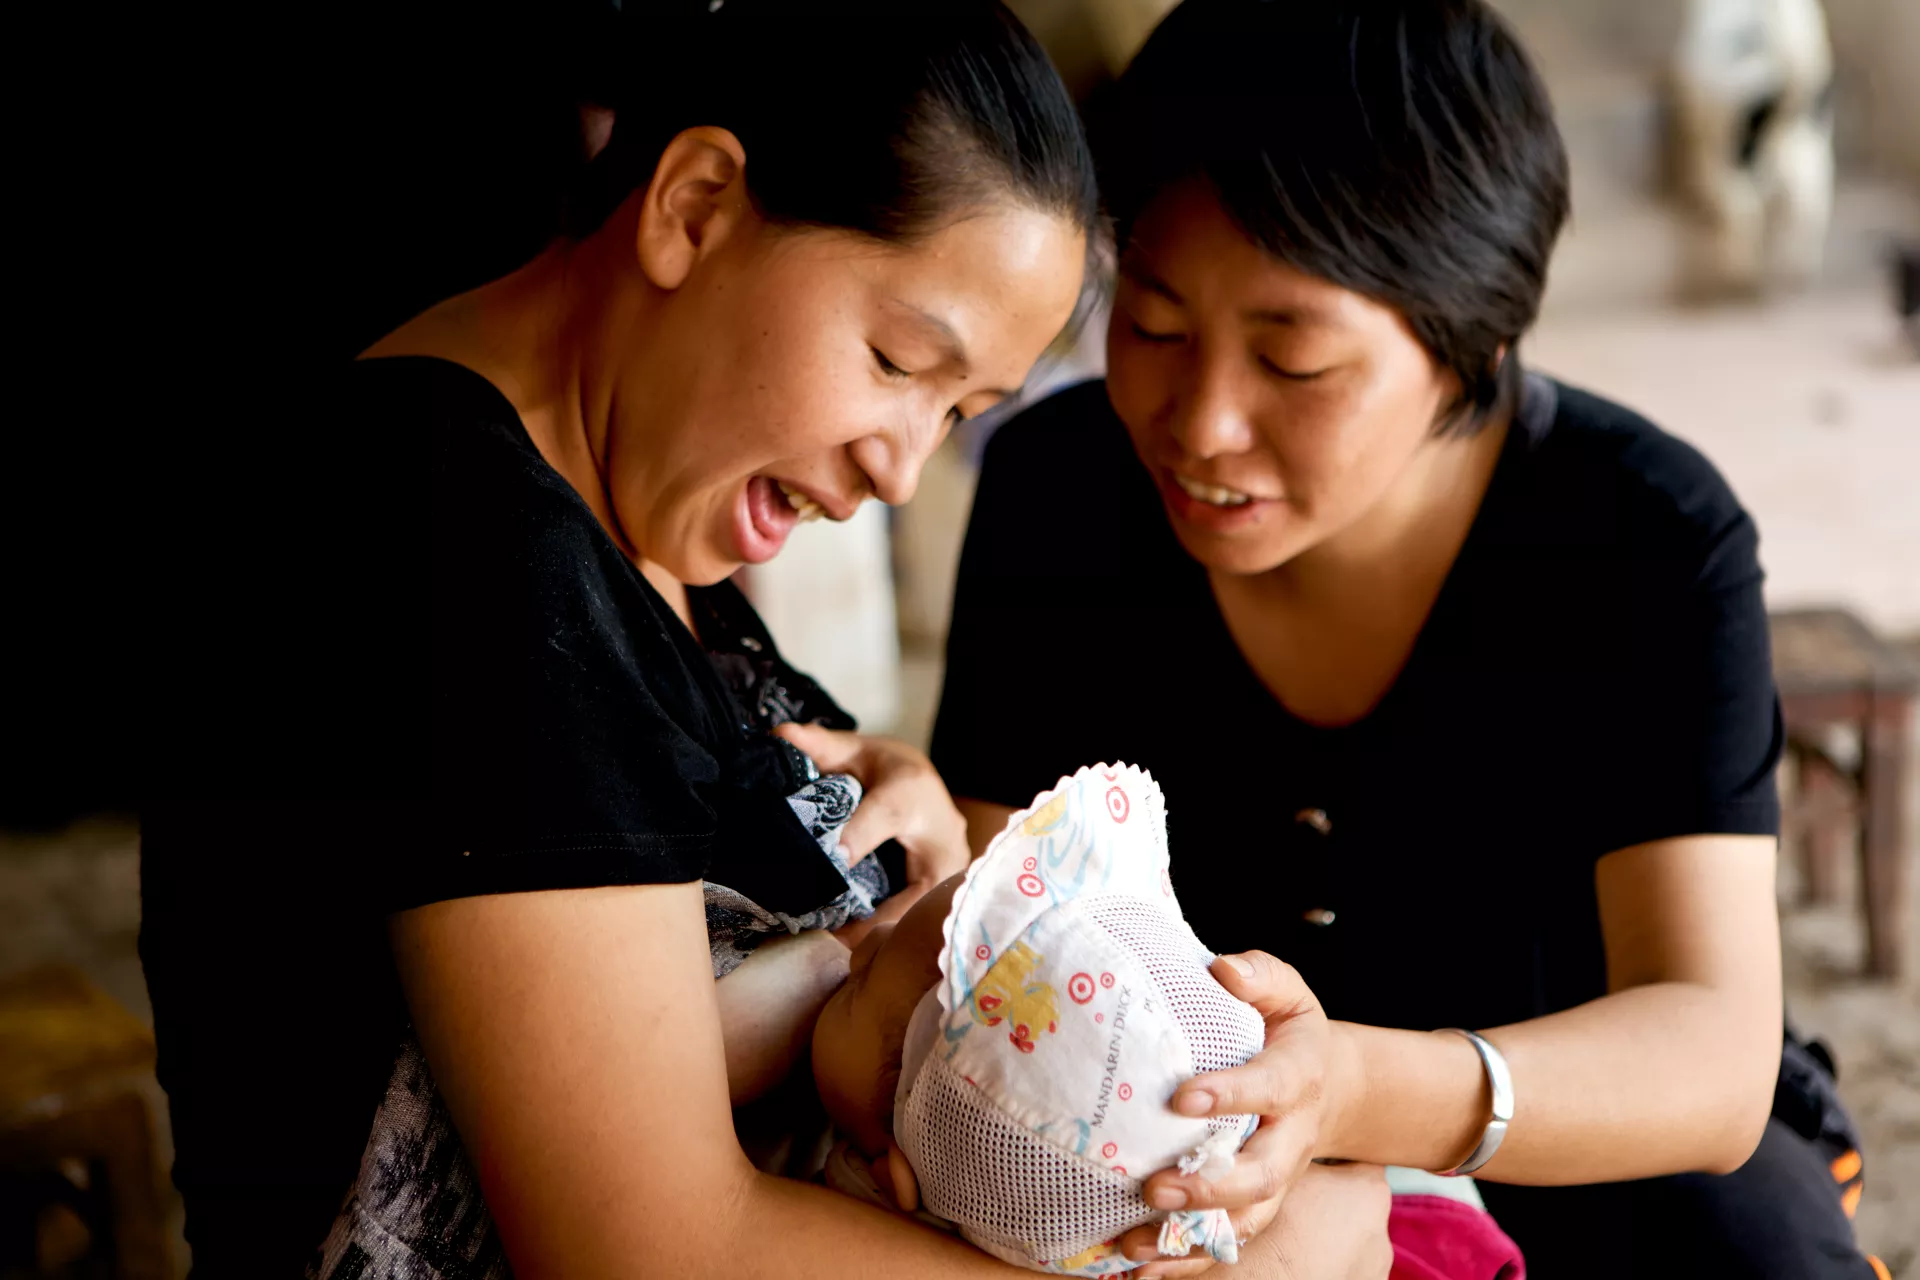 Breastfeeding can help creating a trusting relationship between mother and child.